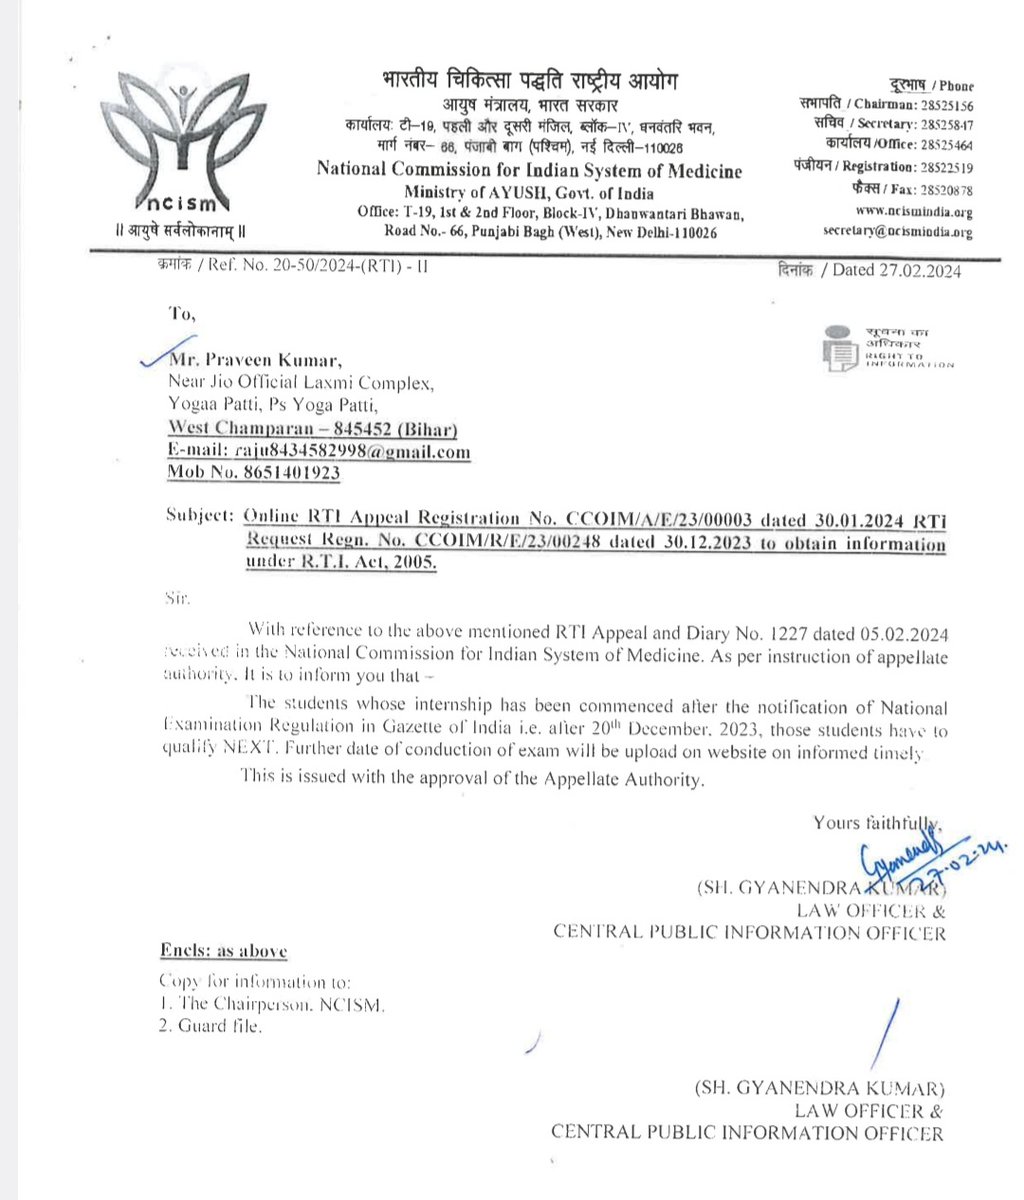 #NCISM - #RTI Reply...
#Ayush students whose internship will start after 23 December 2023 will have to appear for the #NextExam.